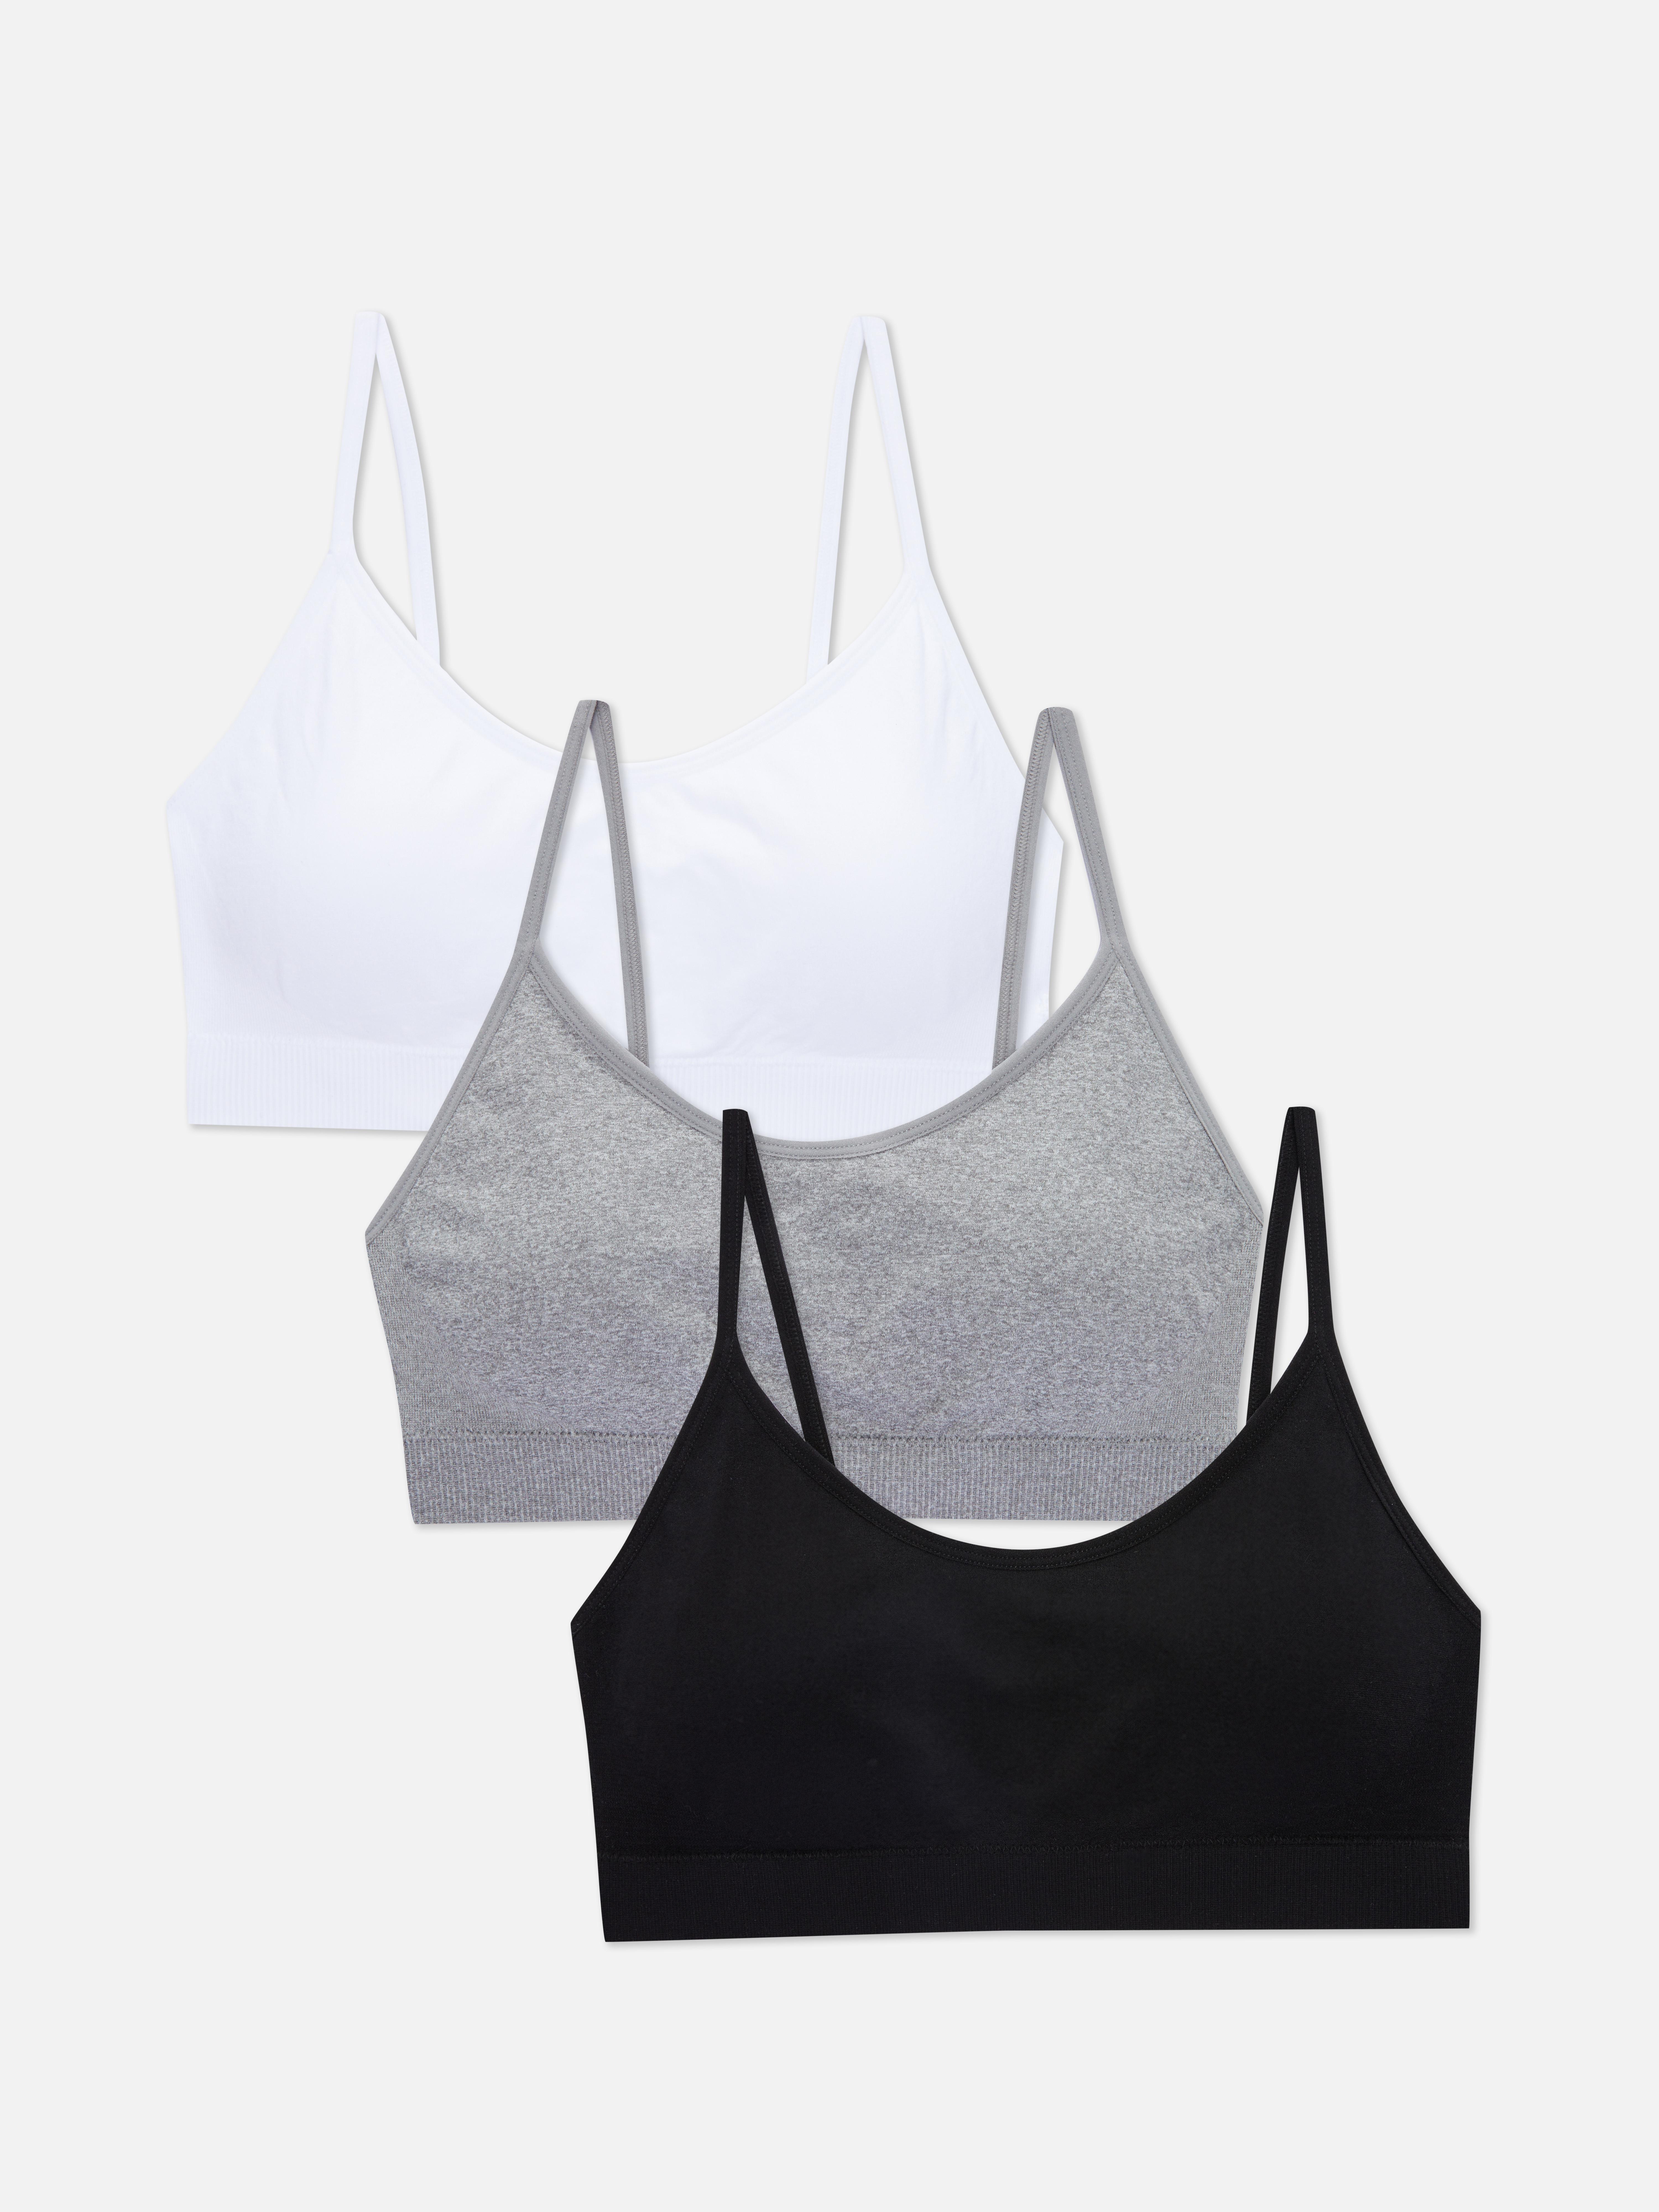 Limited Too Girls' Training Bra - 6 Pack Seamless Cami Bralette